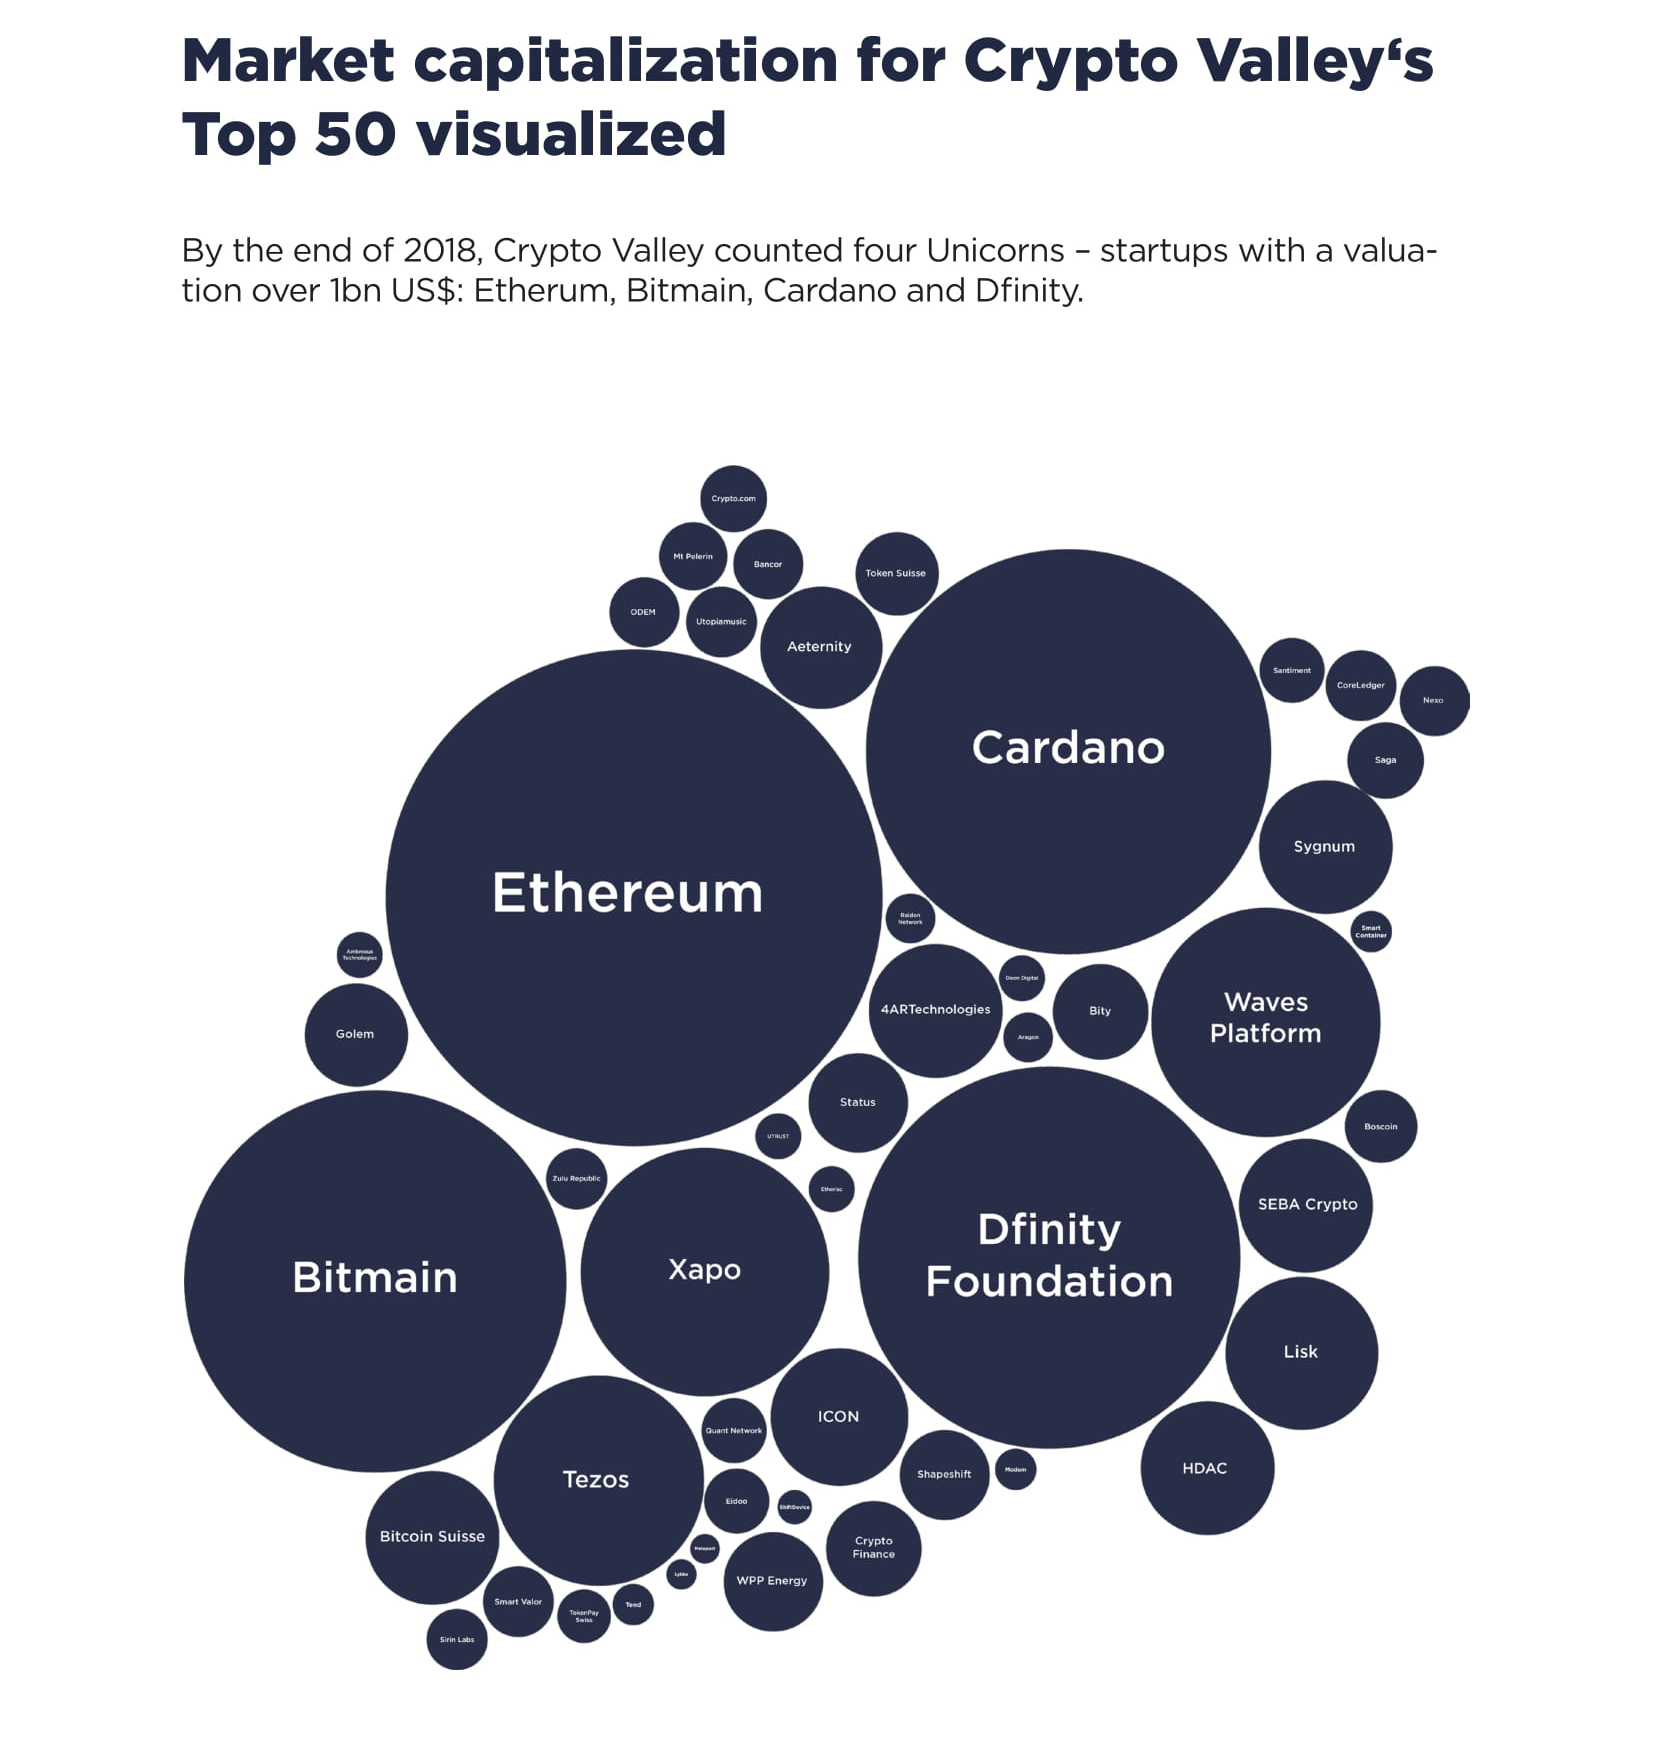 Market capitalization for Crypto Valley‘s Top 50 visualized